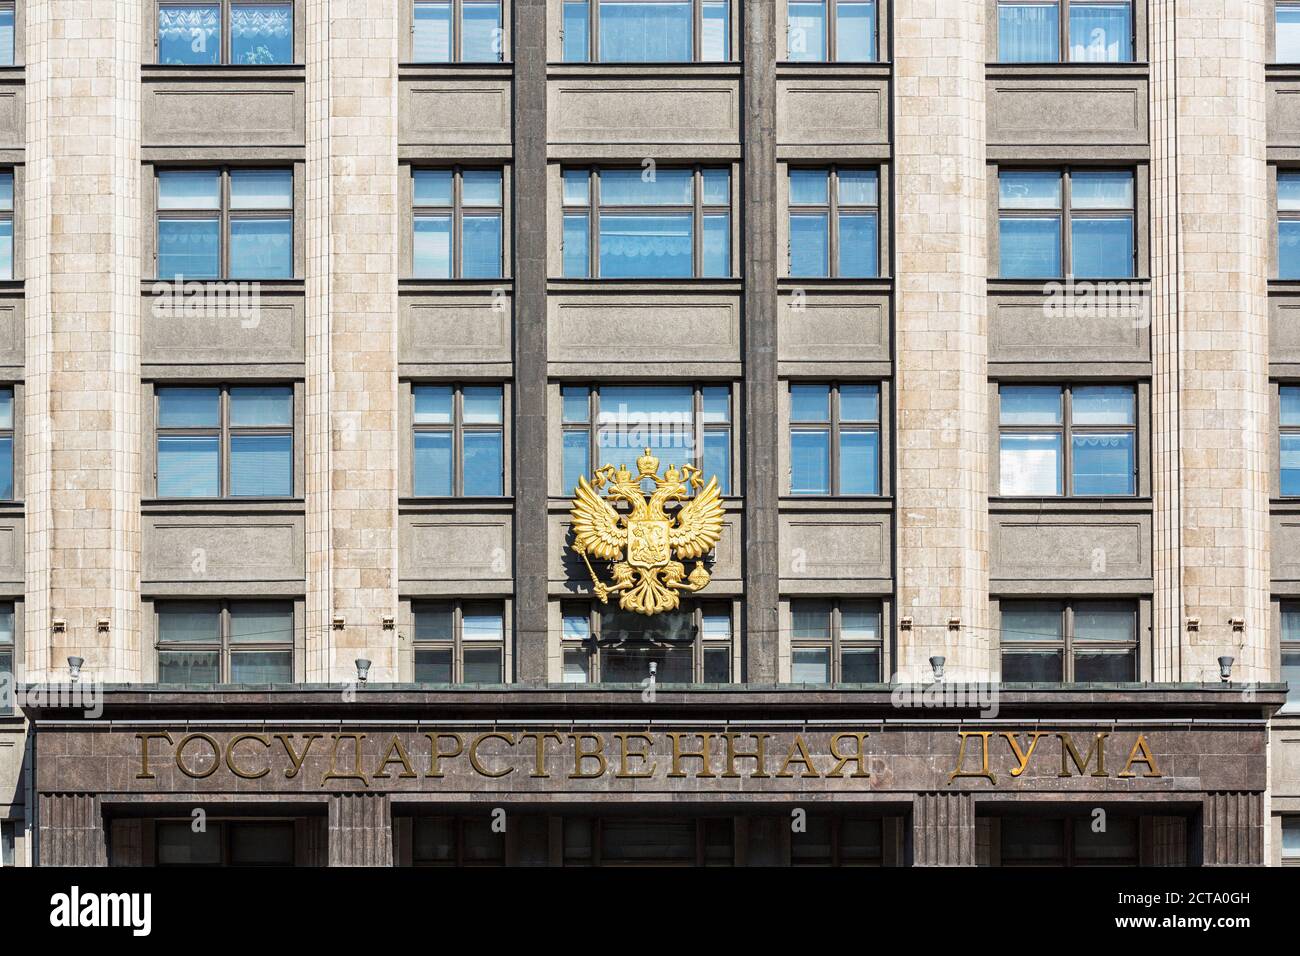 Russia, Central Russia, Moscow, State Duma, lower house of the Federal Assembly of Russia, Double eagle on the facade Stock Photo